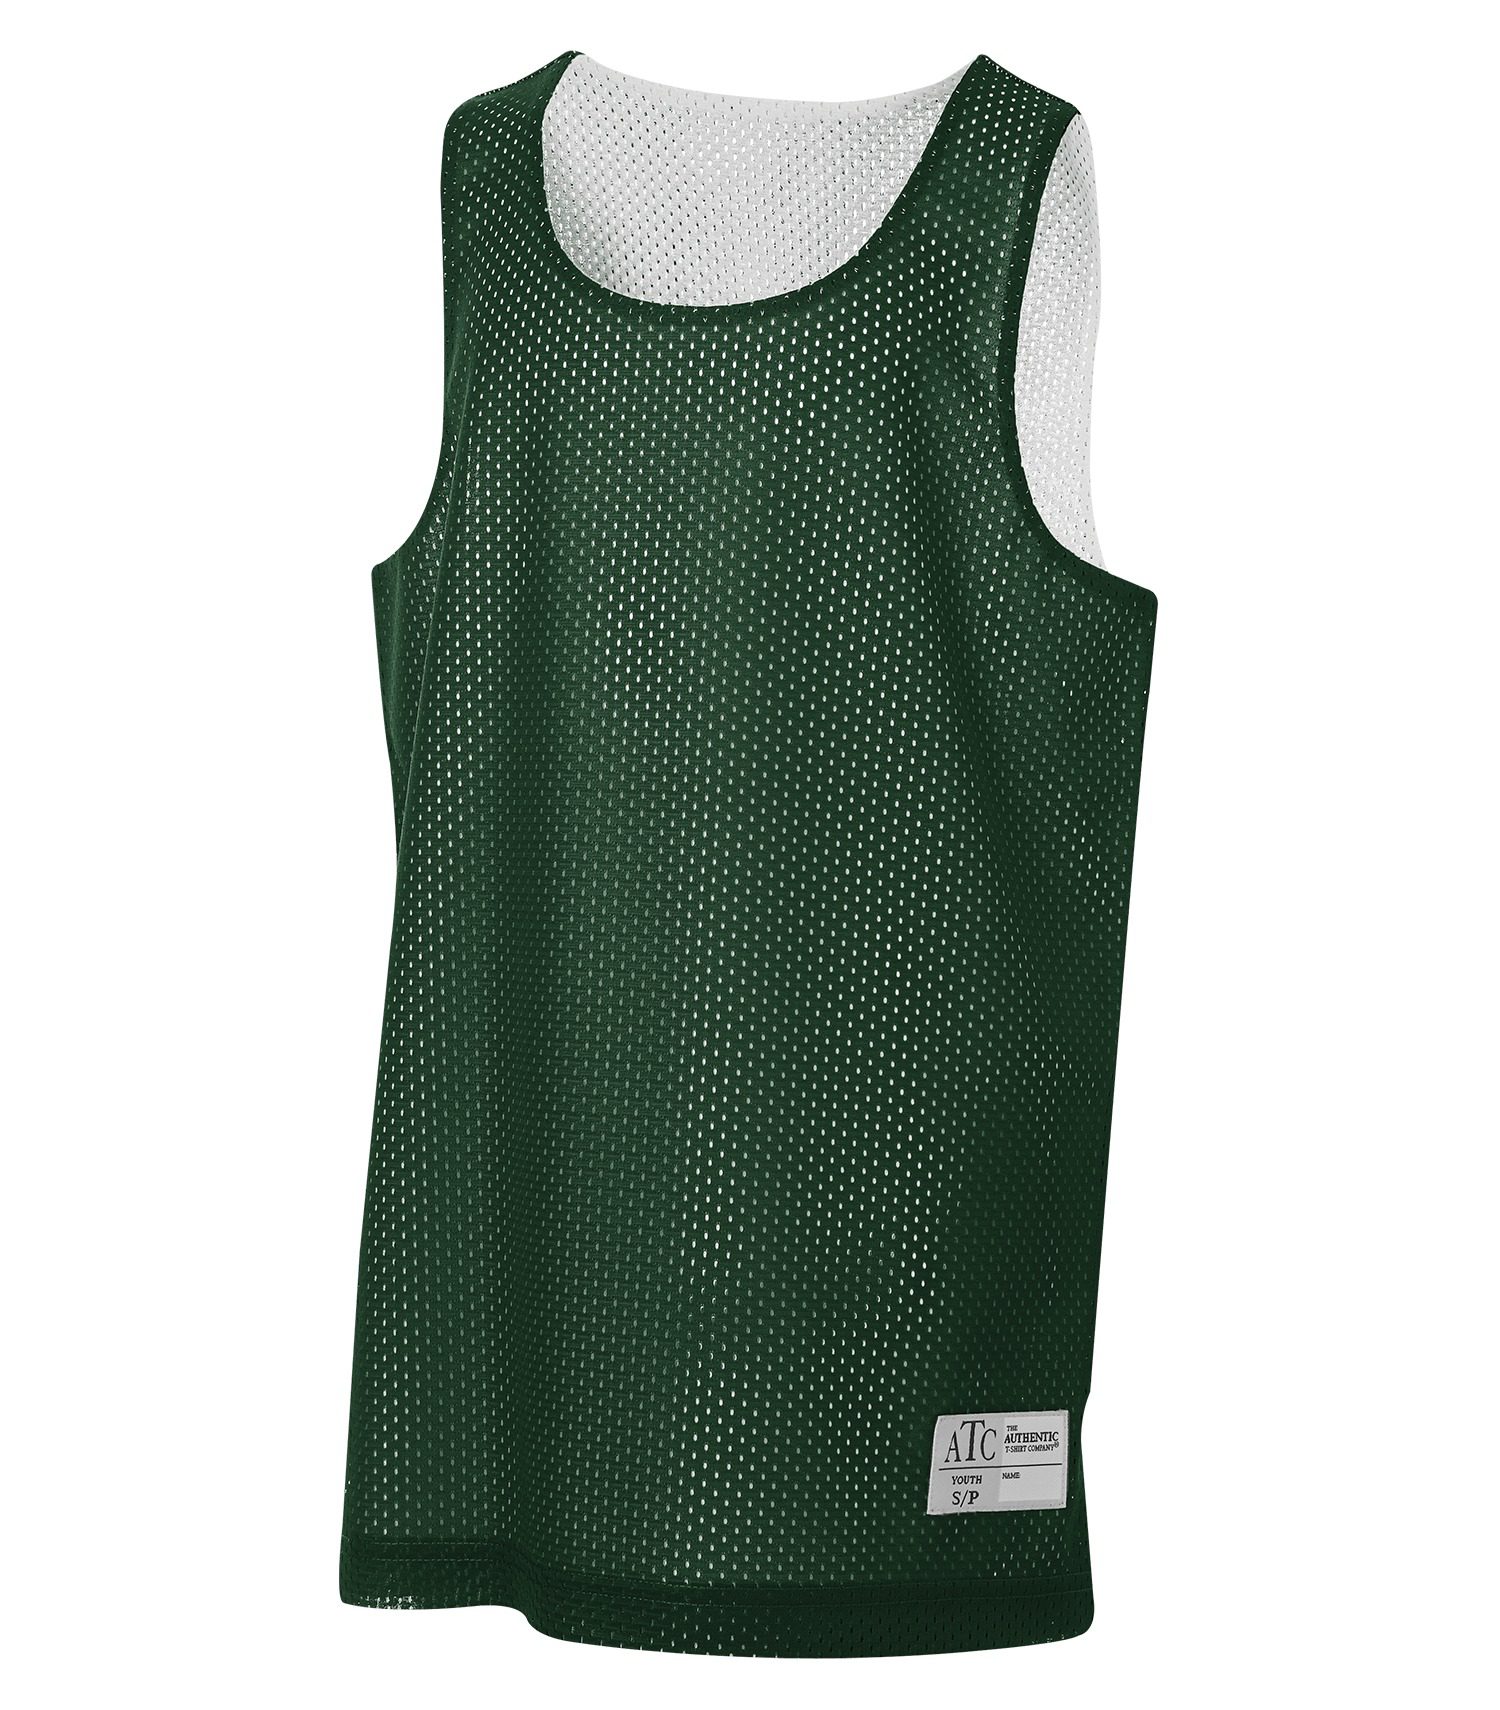 ATC™ PRO MESH REVERSIBLE YOUTH TANK TOP #Y3524 Forest Green / White